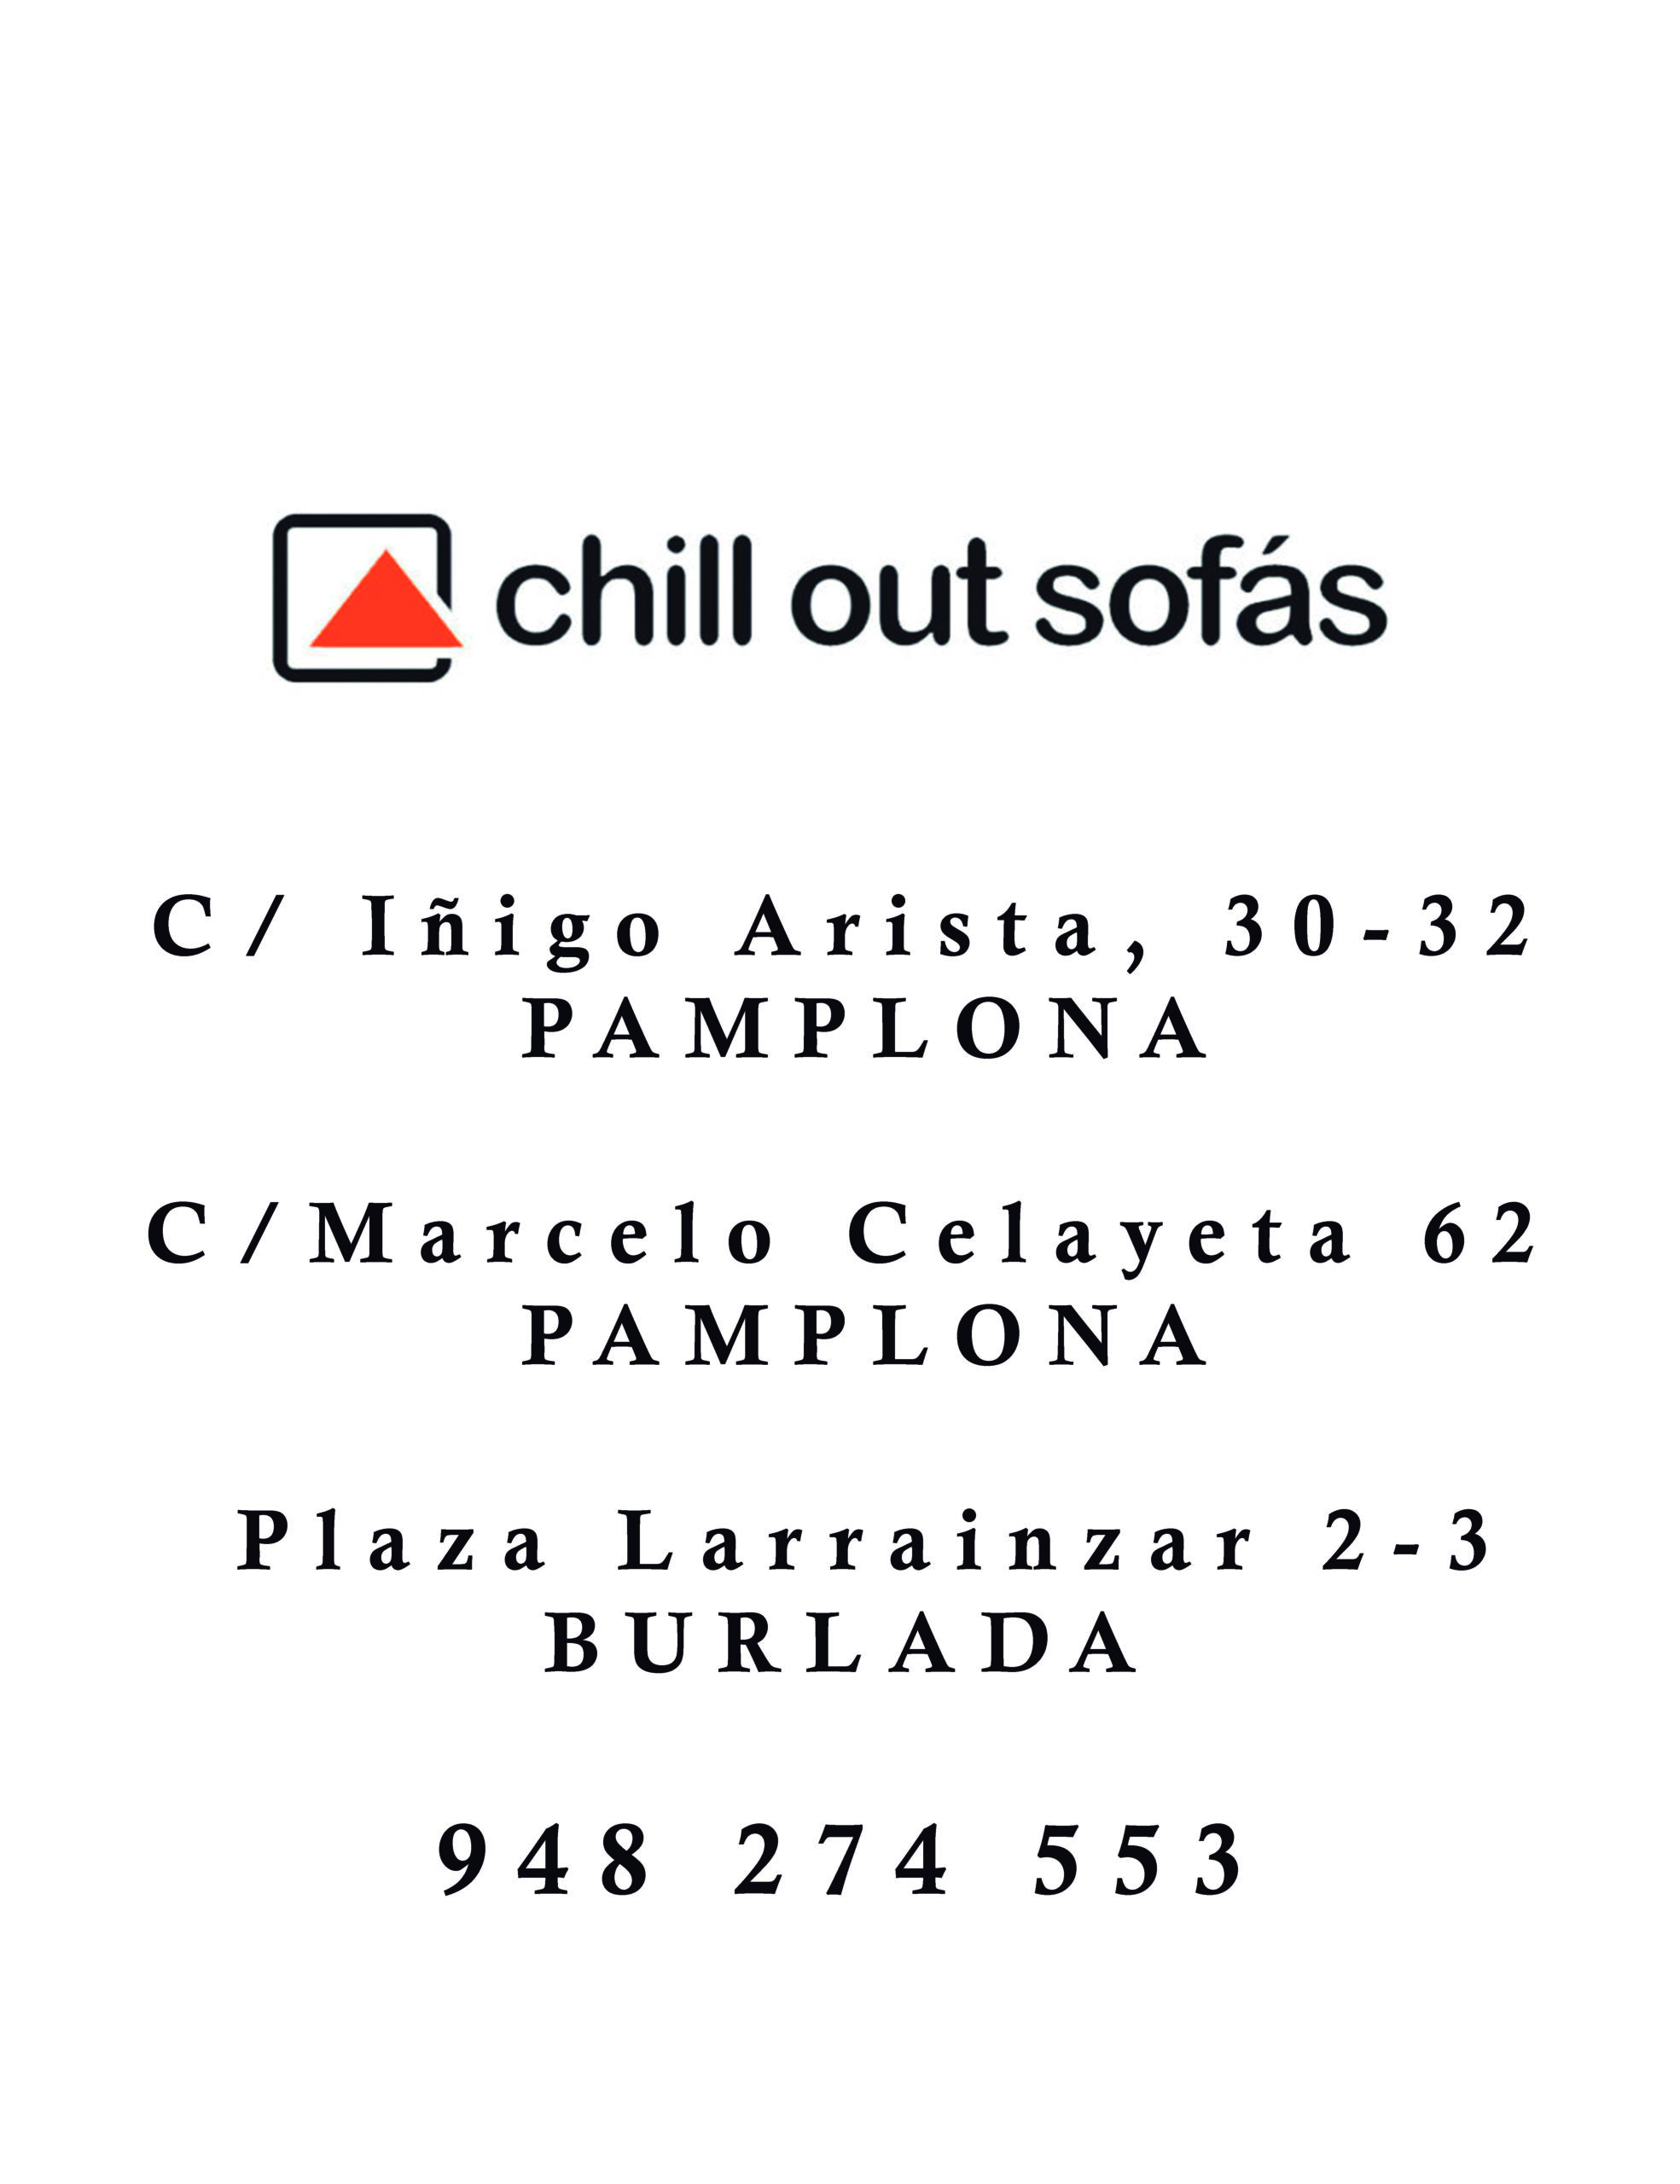 Chill Out Sofas